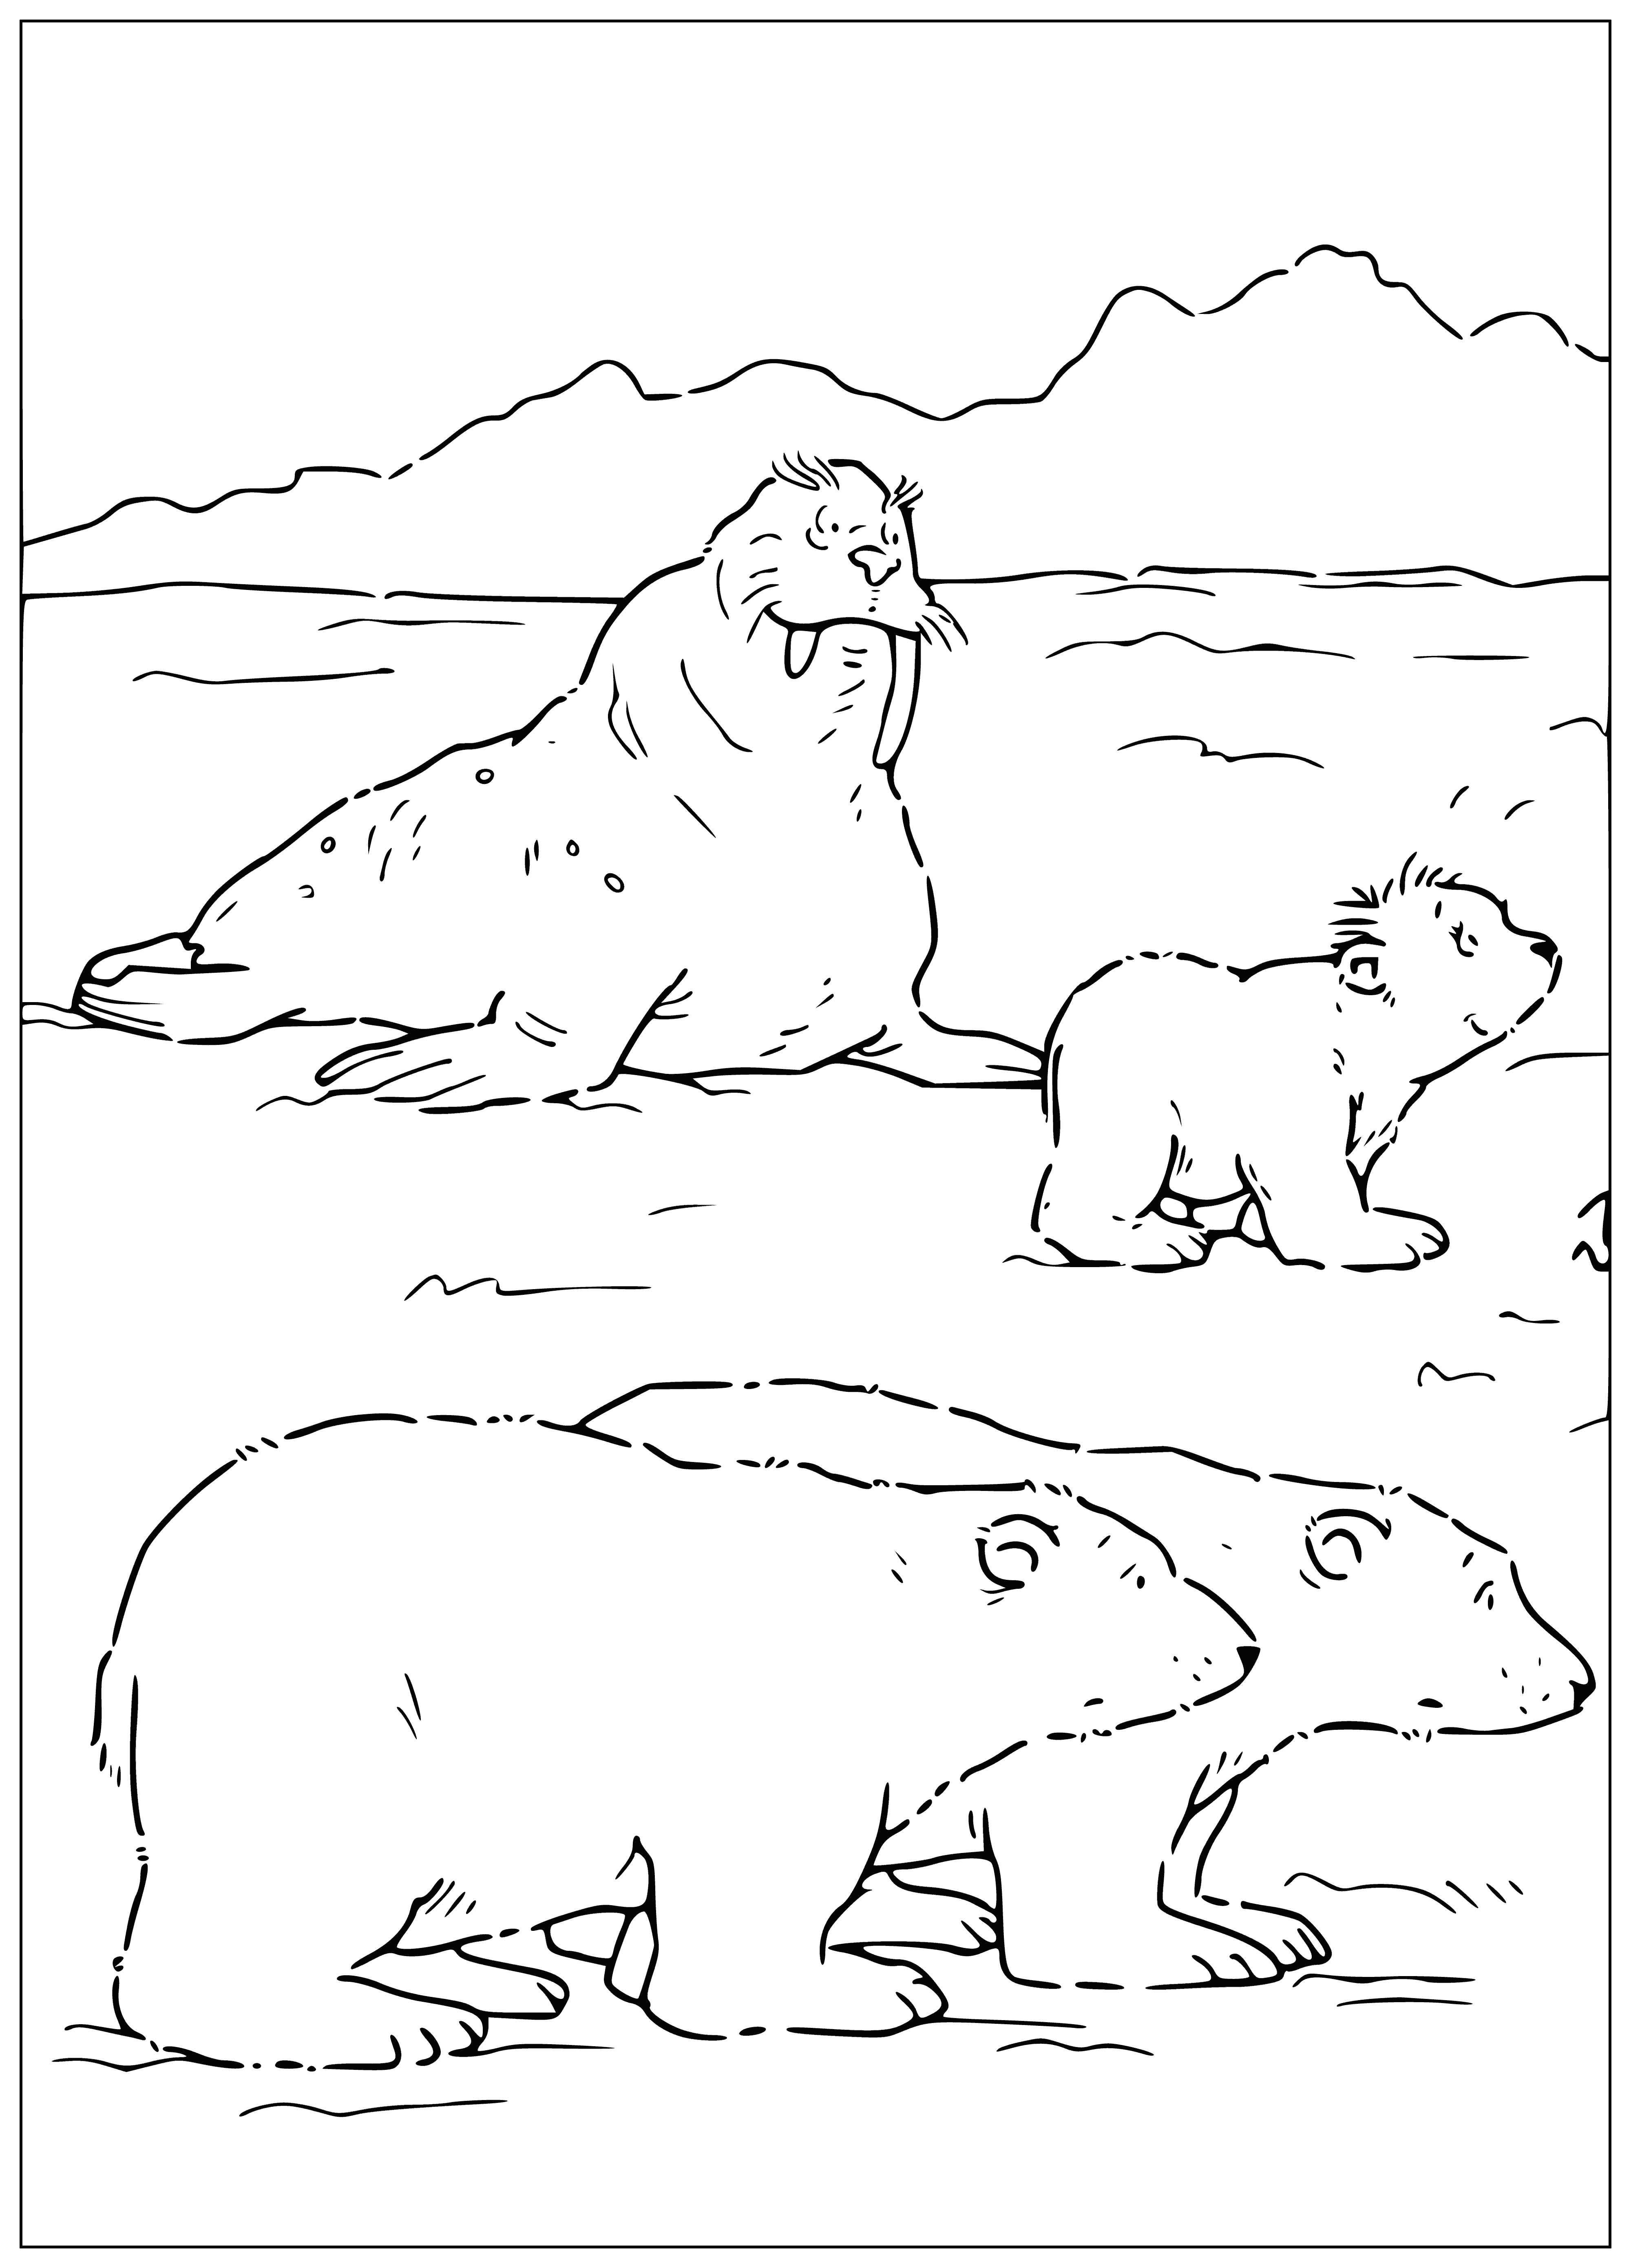 Walrus and bears coloring page